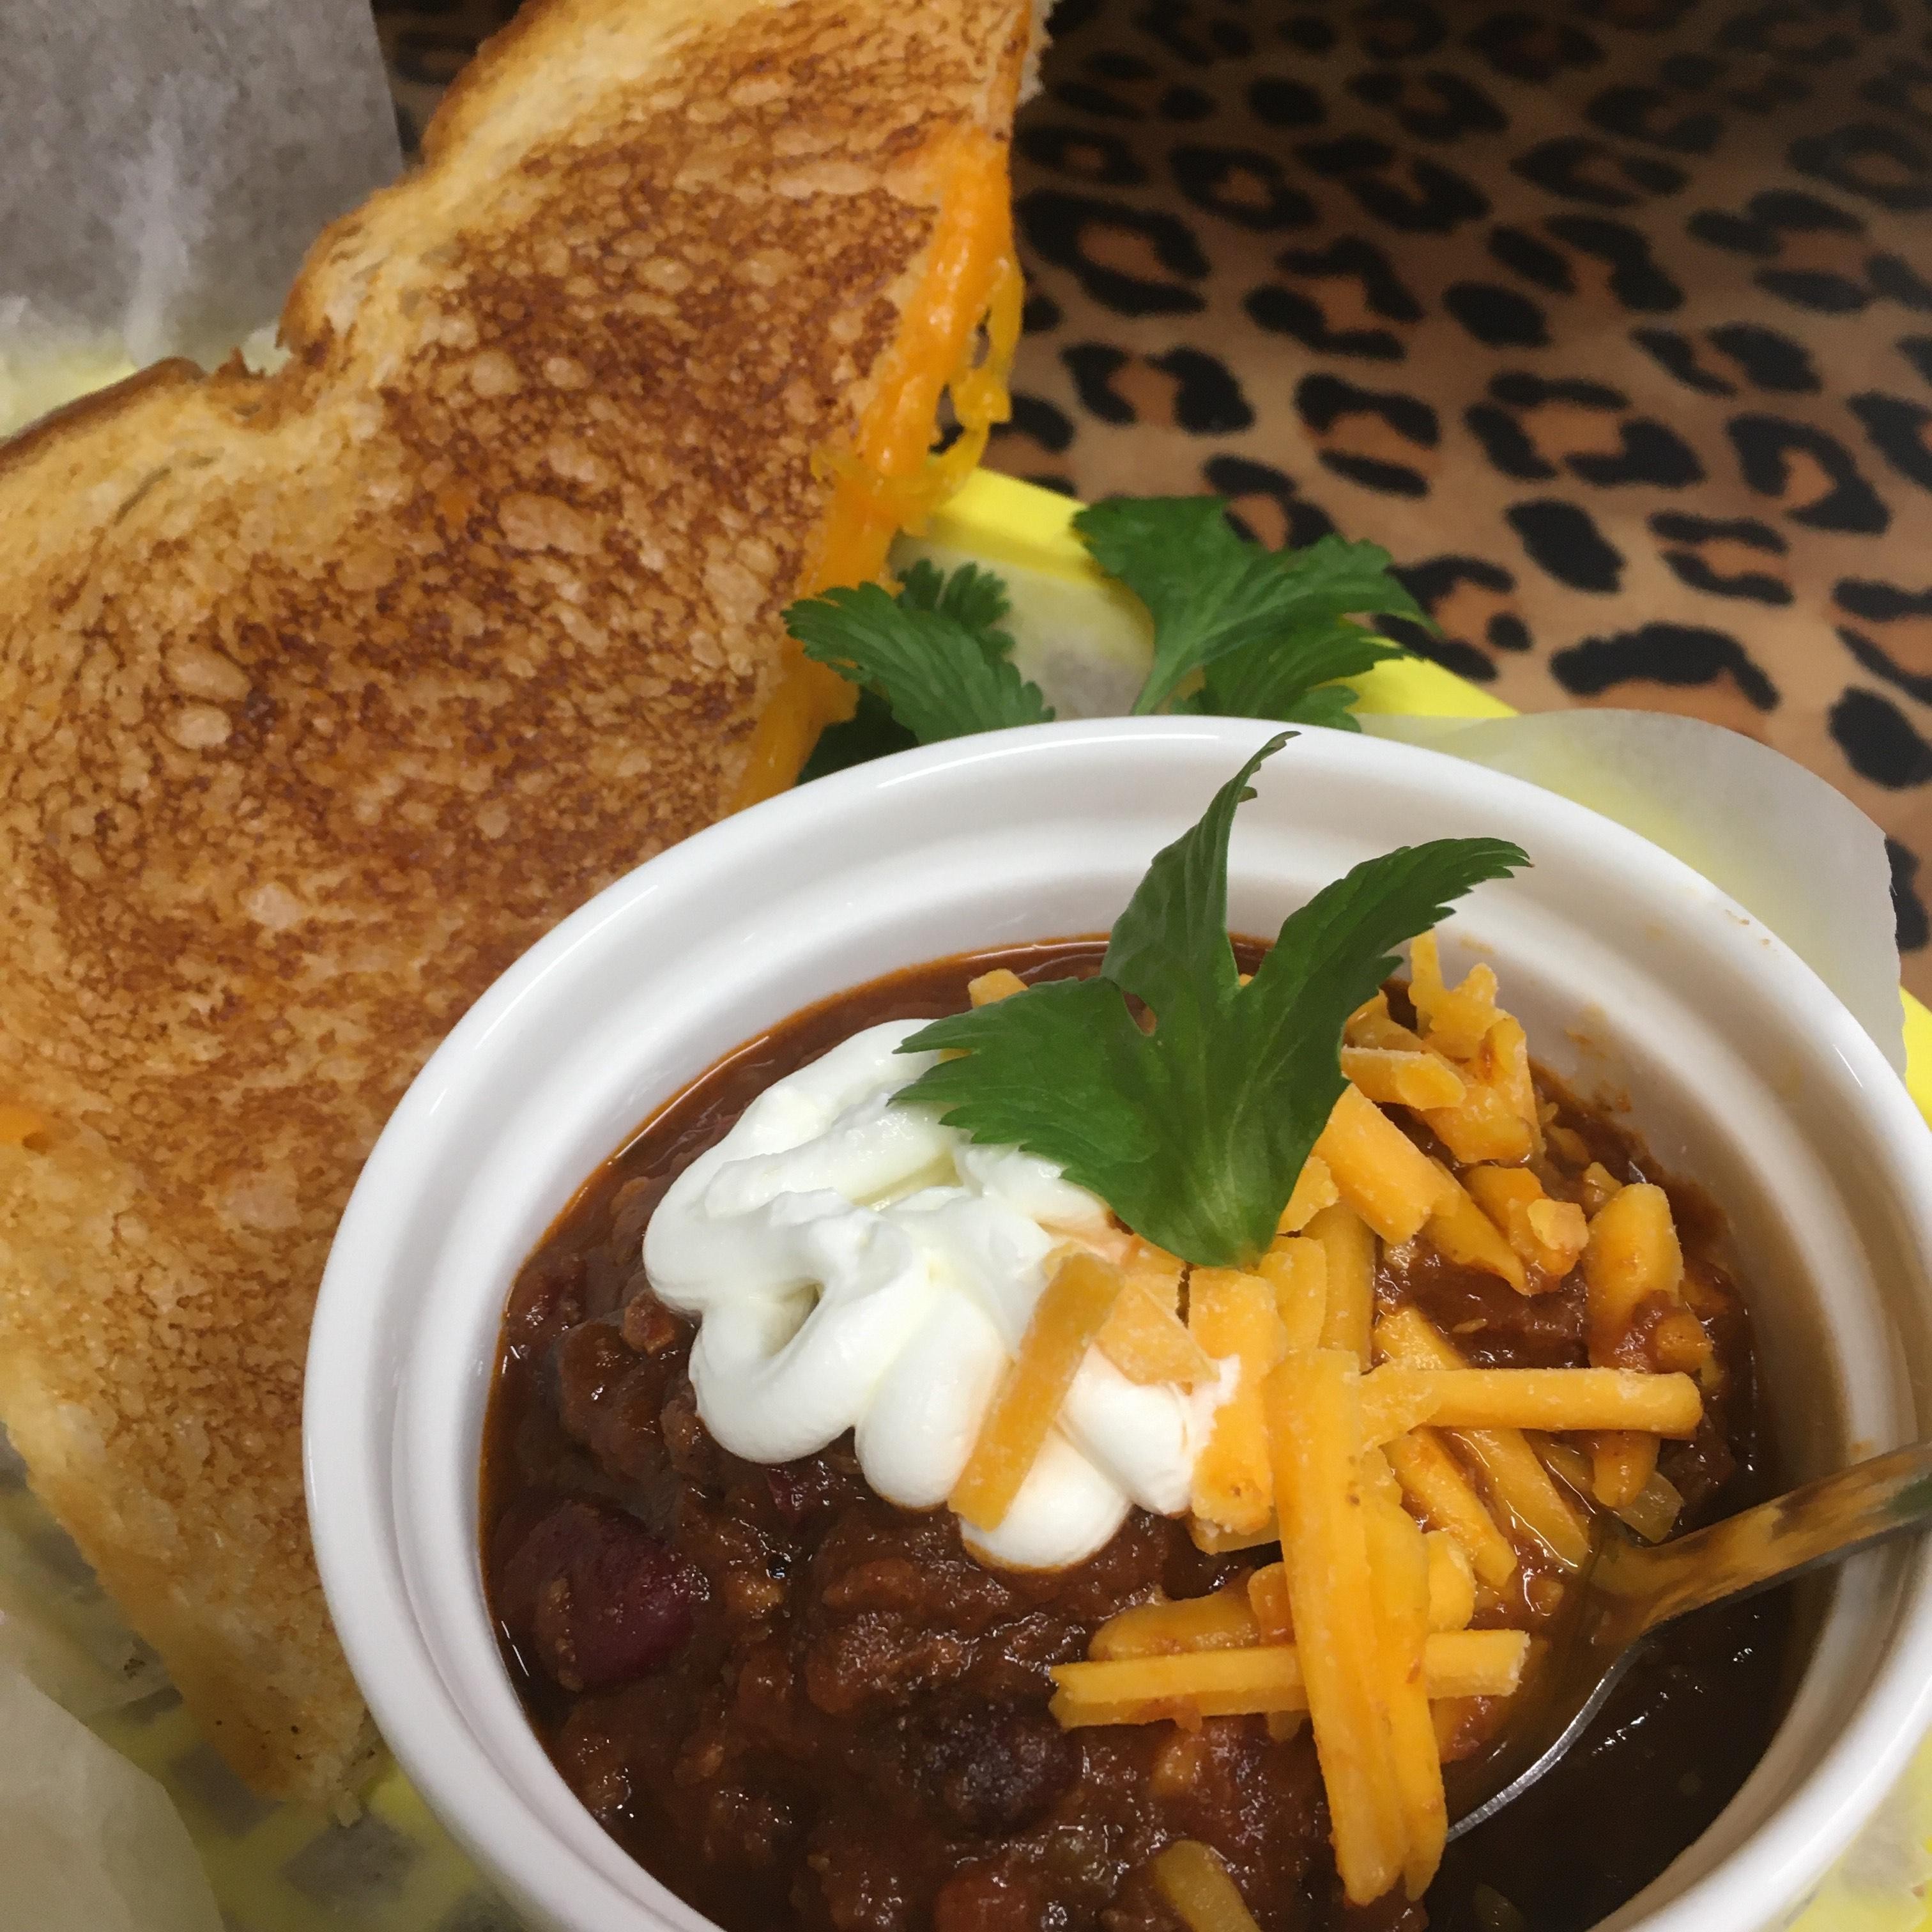 1/2 Grilled Cheese and Chili Combo